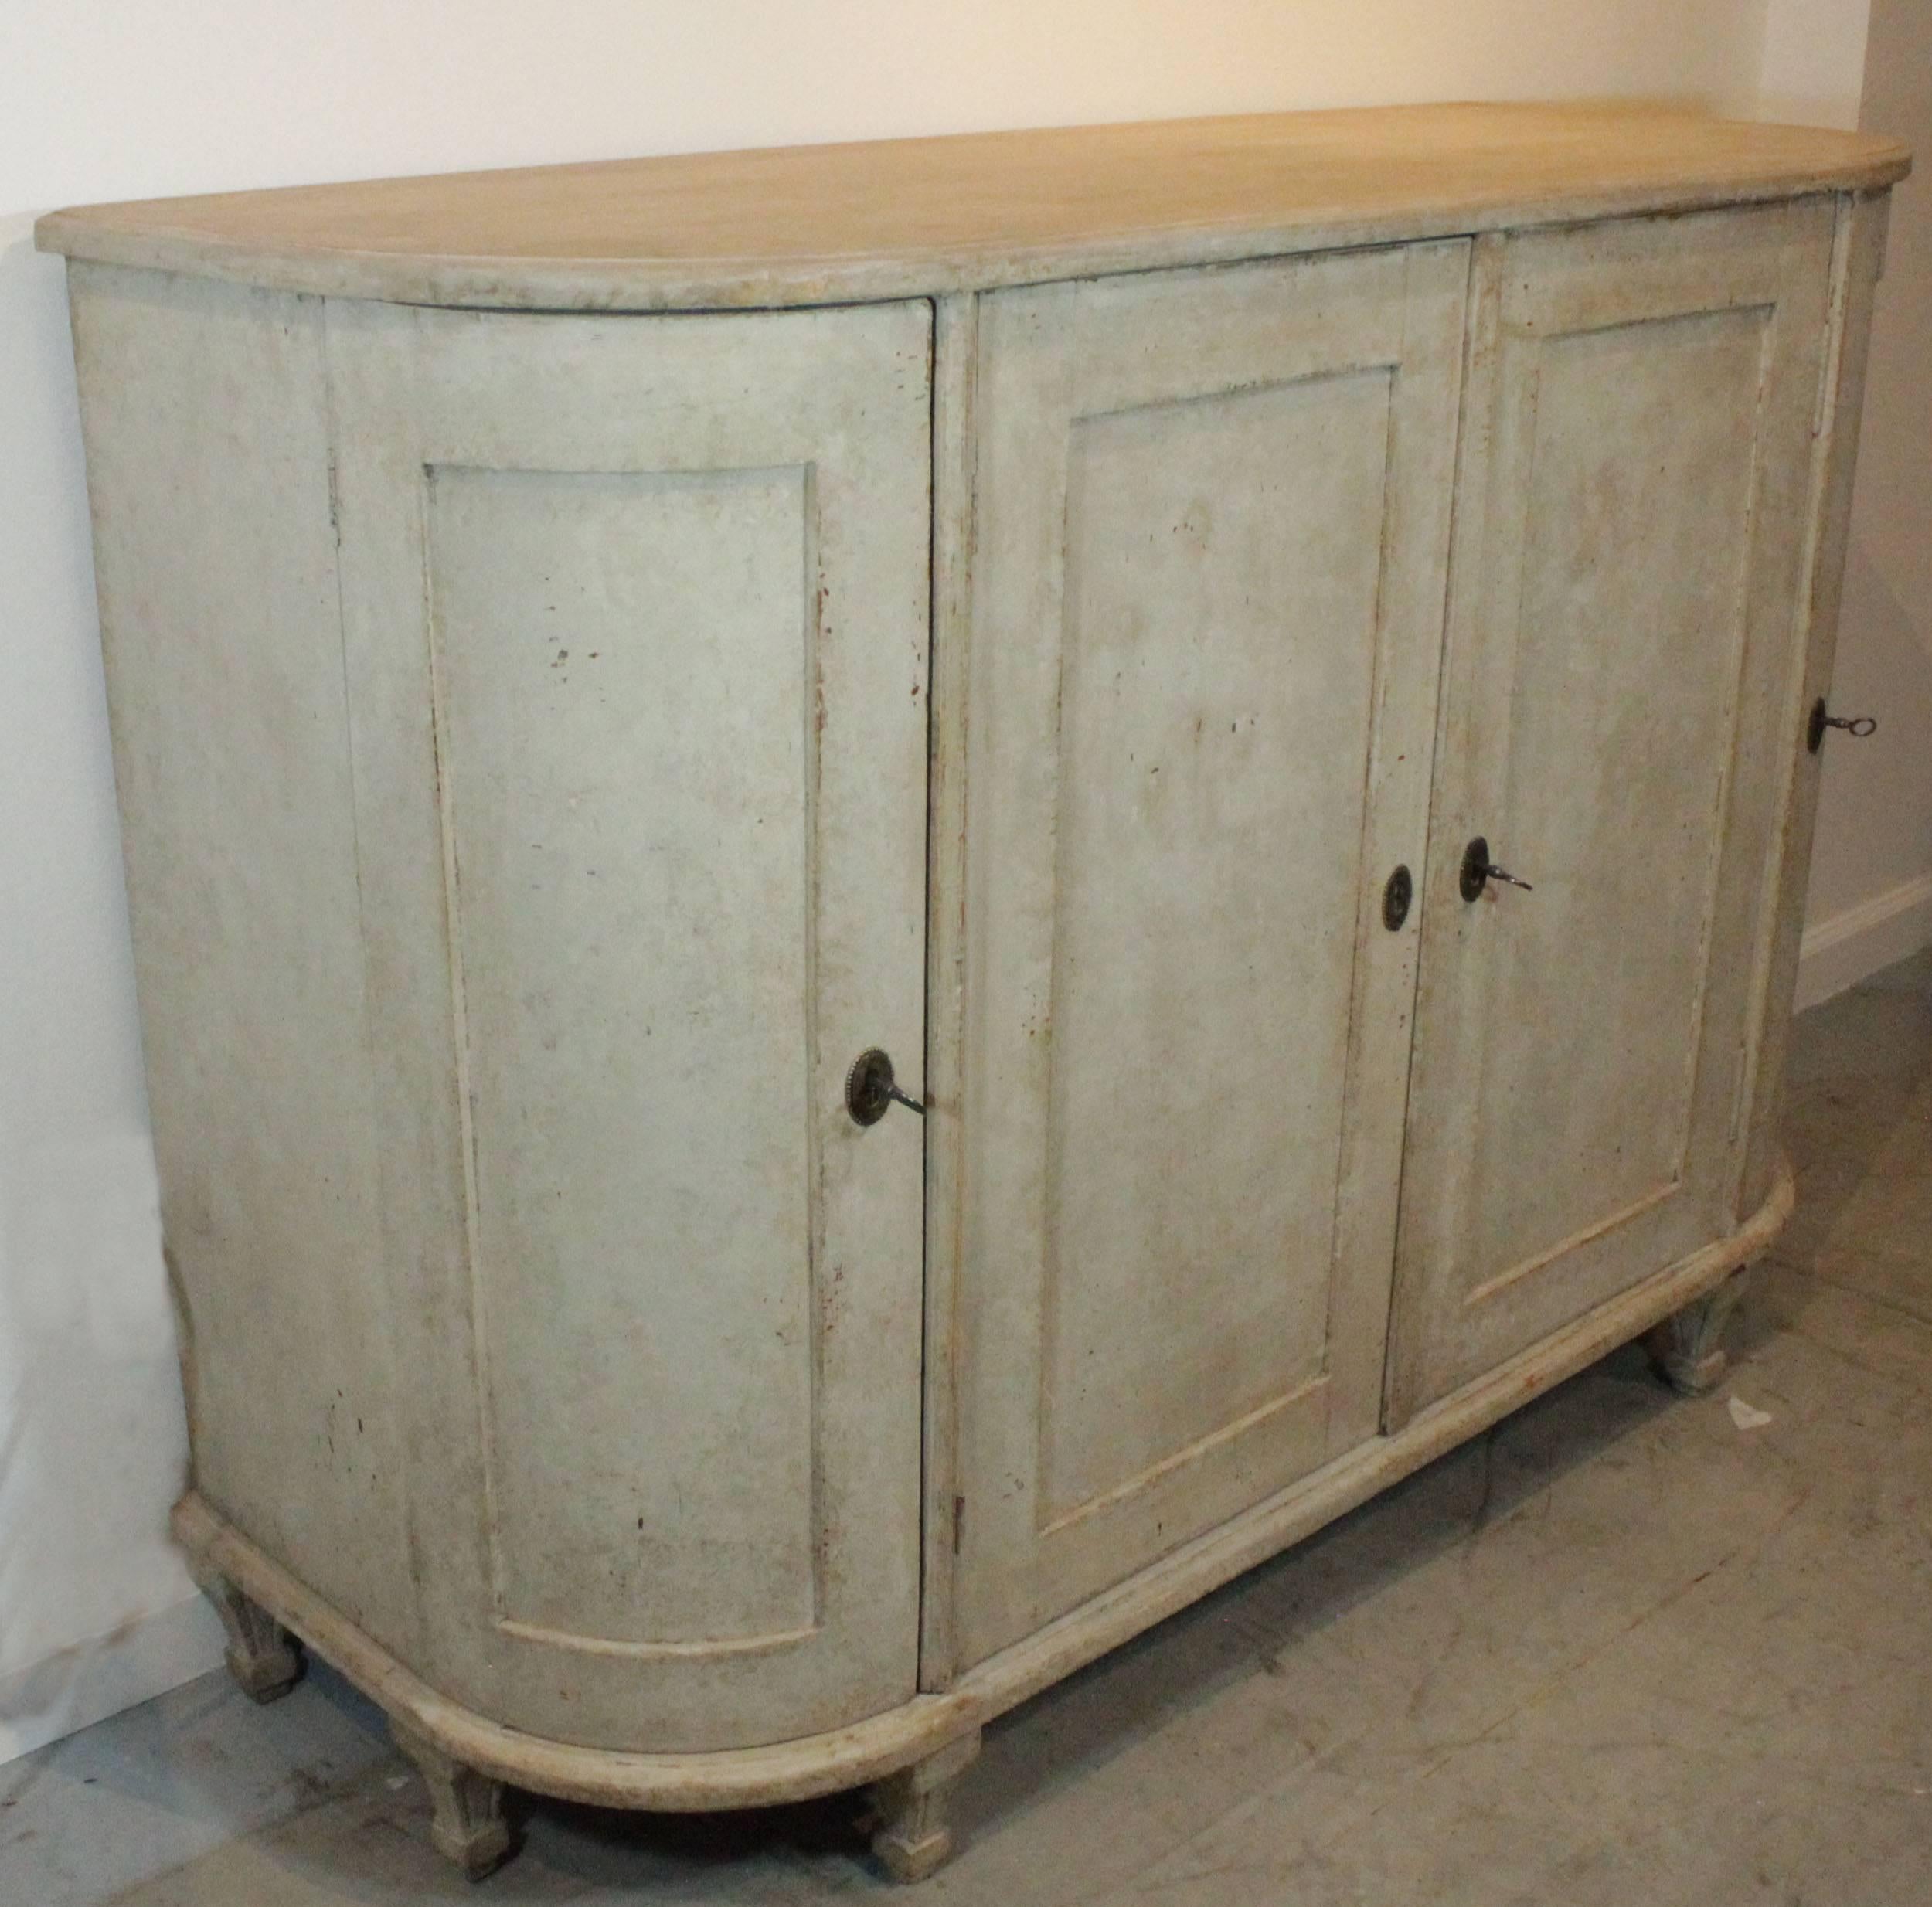 Painted Antique Swedish Sideboard with Curved Sides, Early 19th Century